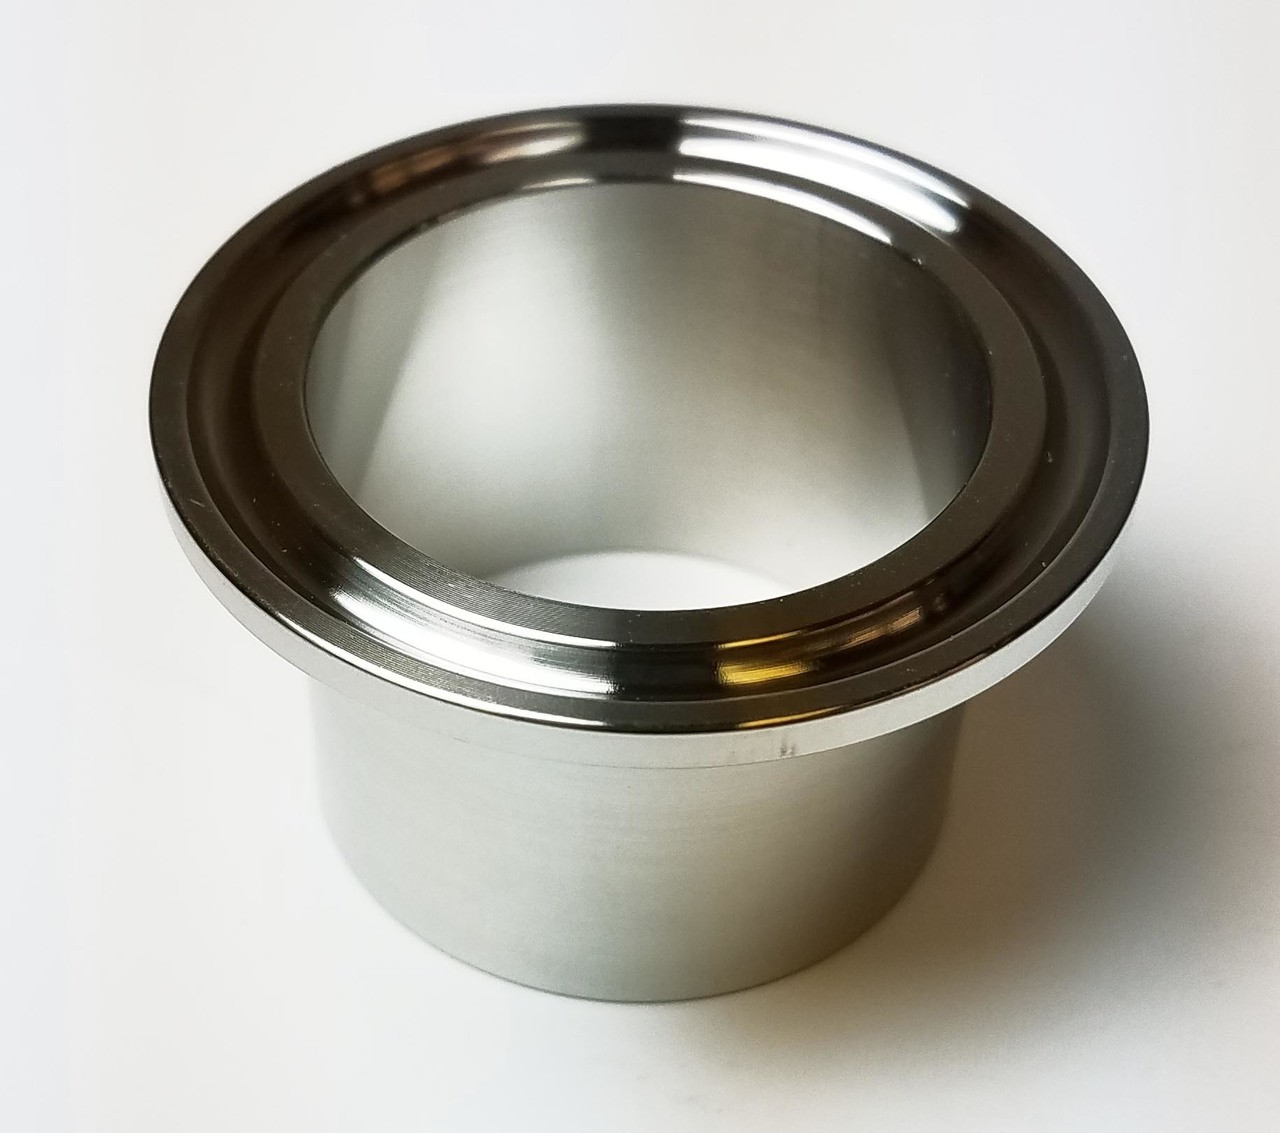 SS316 Stainless Steel Diameter 102MM 4 Sanitary Weld Pipe with 77MM Ferrule Flange fits 2.5 Tri Clamp